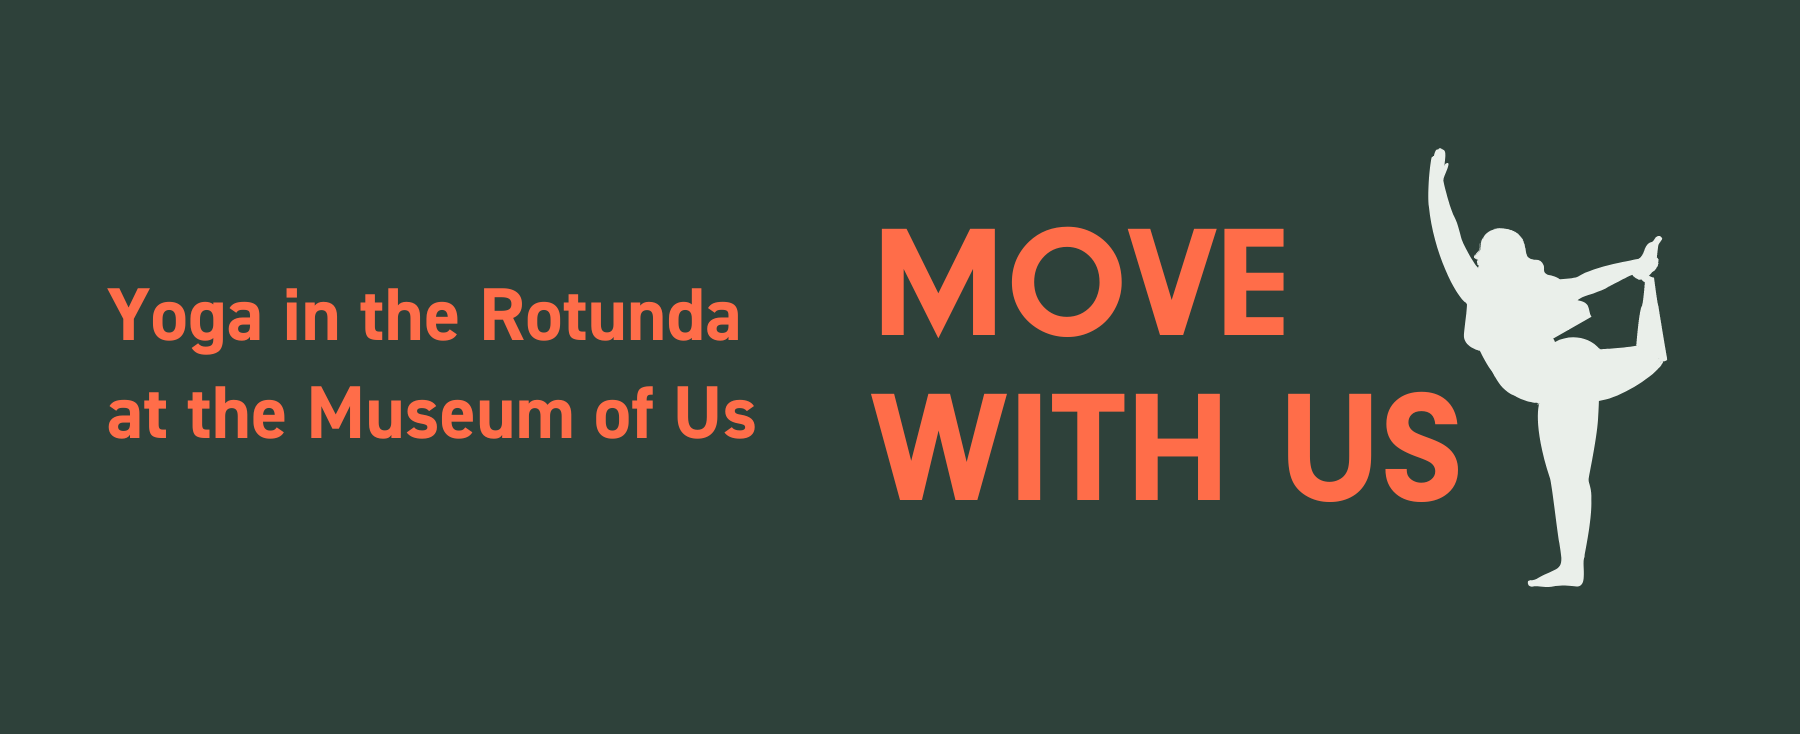 Yoga in the Rotunda at the Museum of Us, Move with Us, written in orange, with a white silhouette on a green background